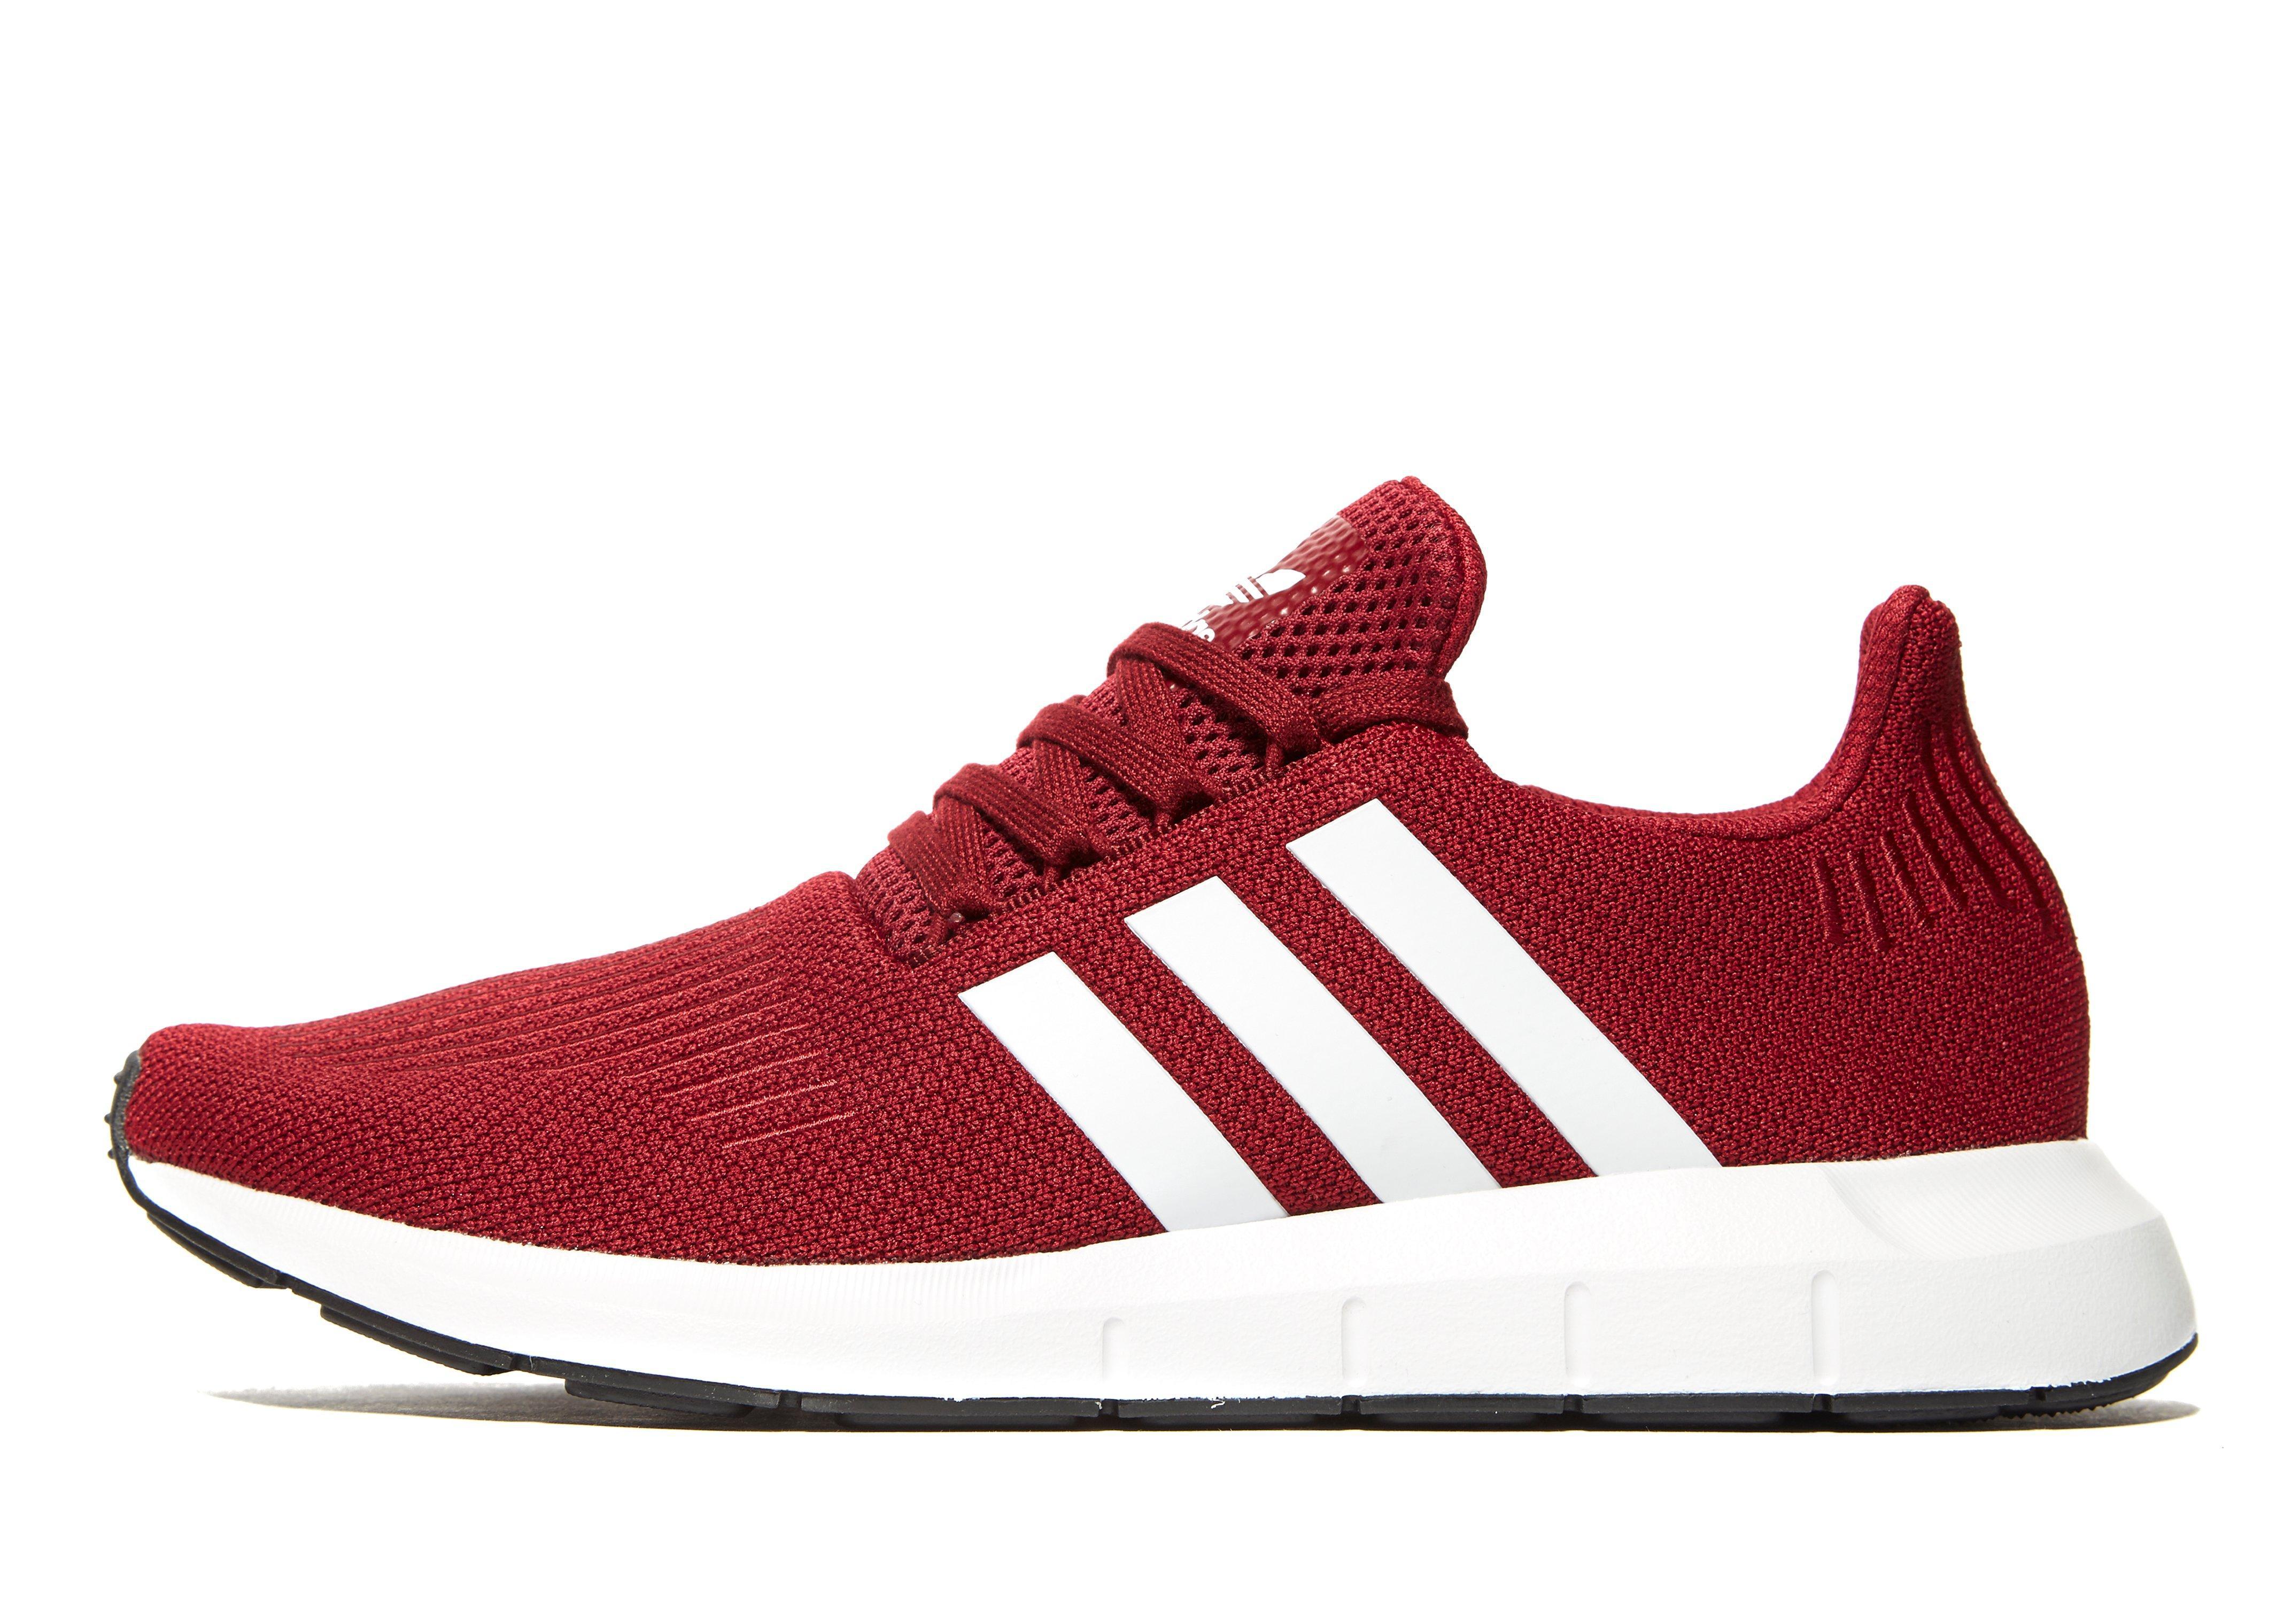 adidas Originals Synthetic Swift Run in Burgundy/White (Red) for Men - Lyst